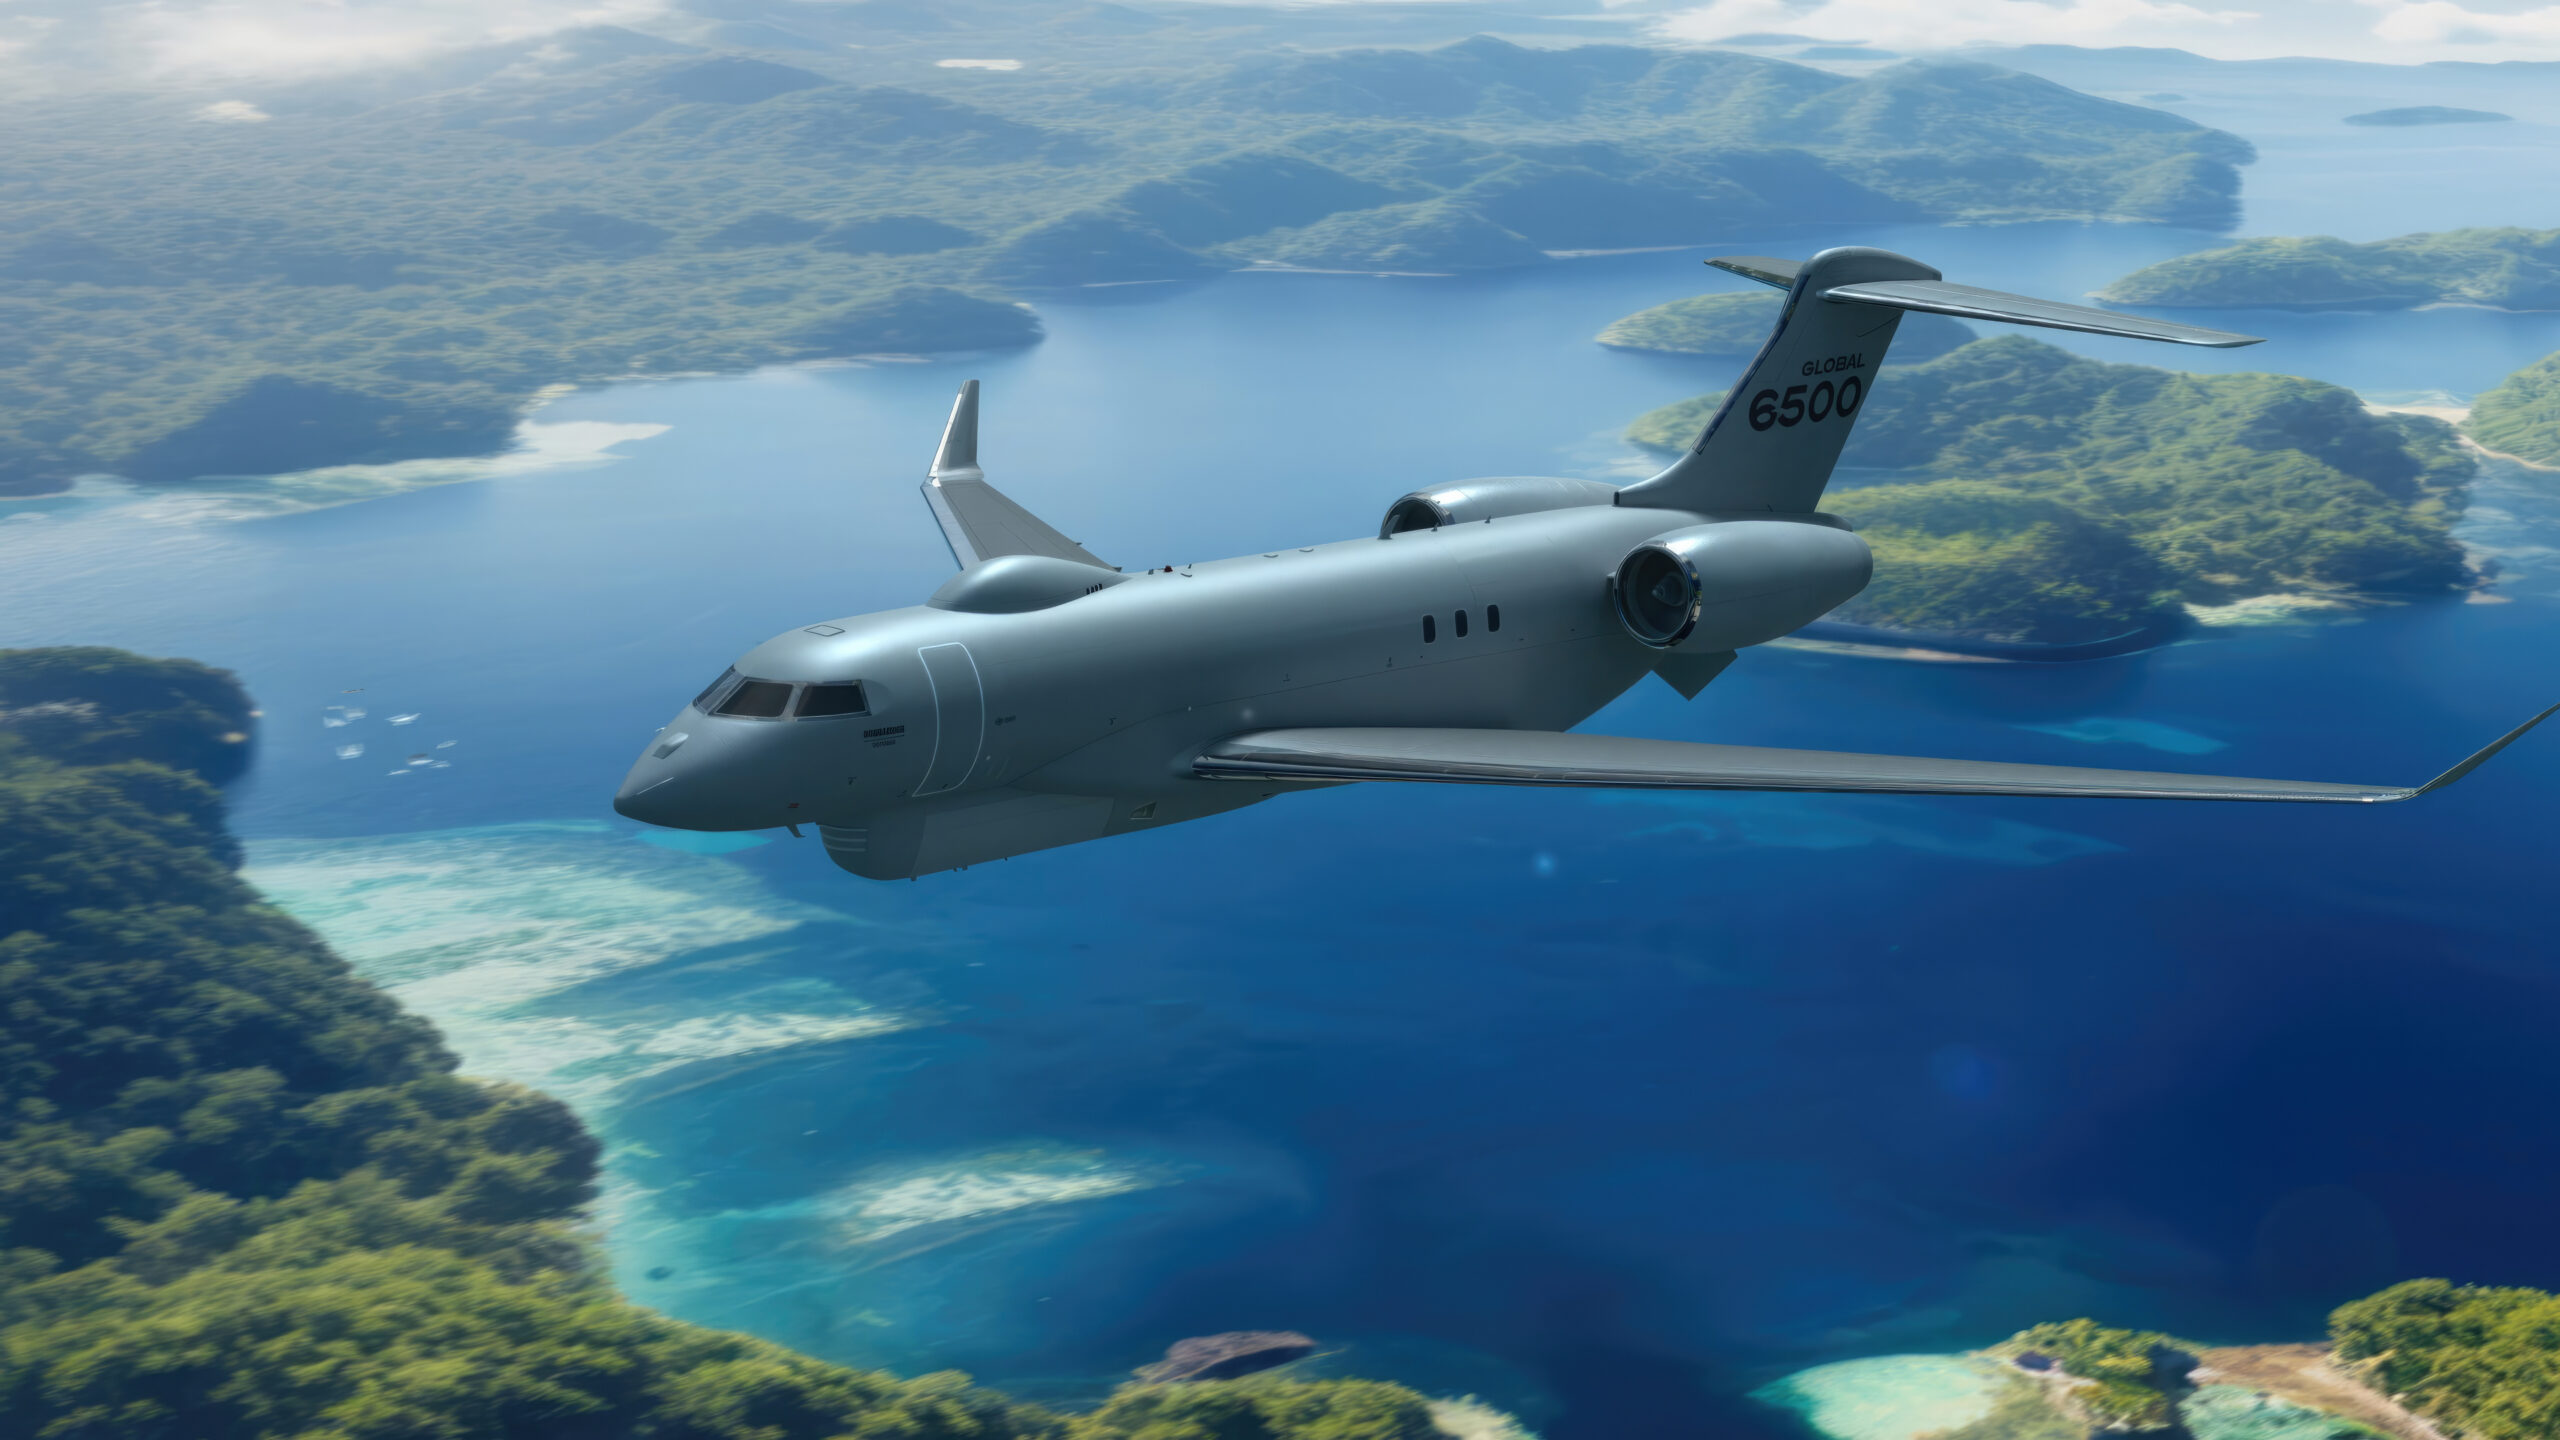 Cutting edge and innovative: Bombardier’s custom airborne solution for special missions